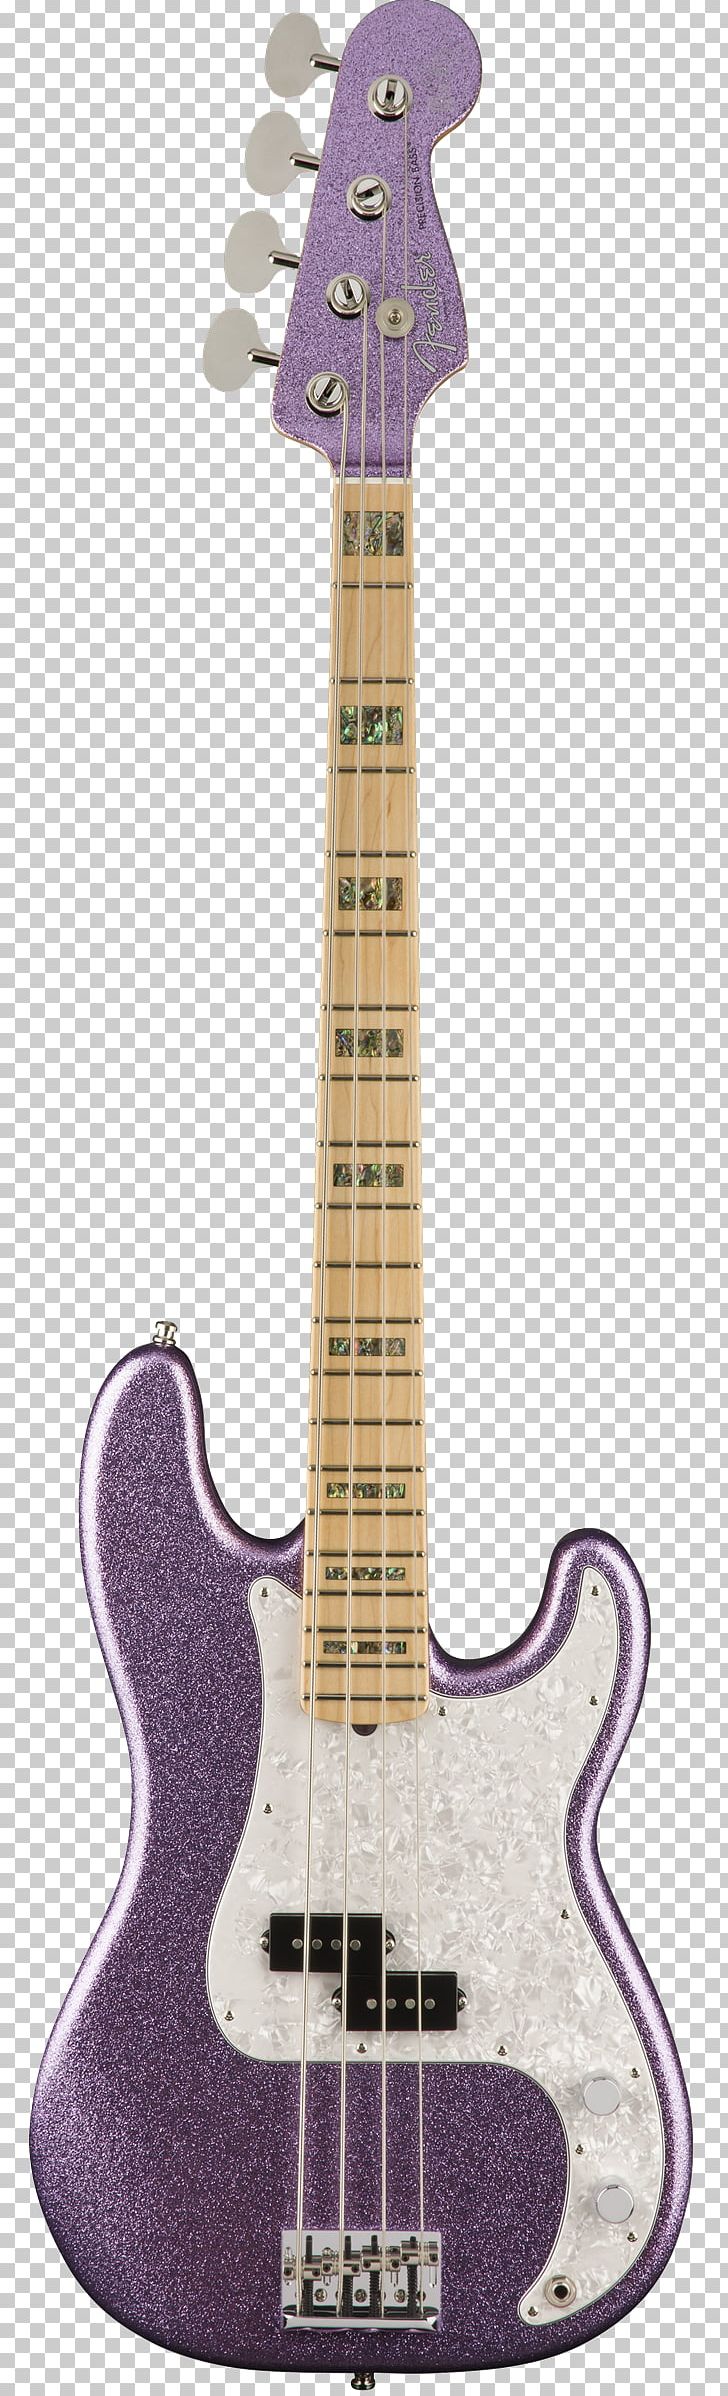 Fender Precision Bass Fender Mustang Bass Fender Jazz Bass Fender Musical Instruments Corporation Bass Guitar PNG, Clipart, Acoustic Electric Guitar, Acoustic Guitar, Double Bass, Fingerboard, Guitar Free PNG Download